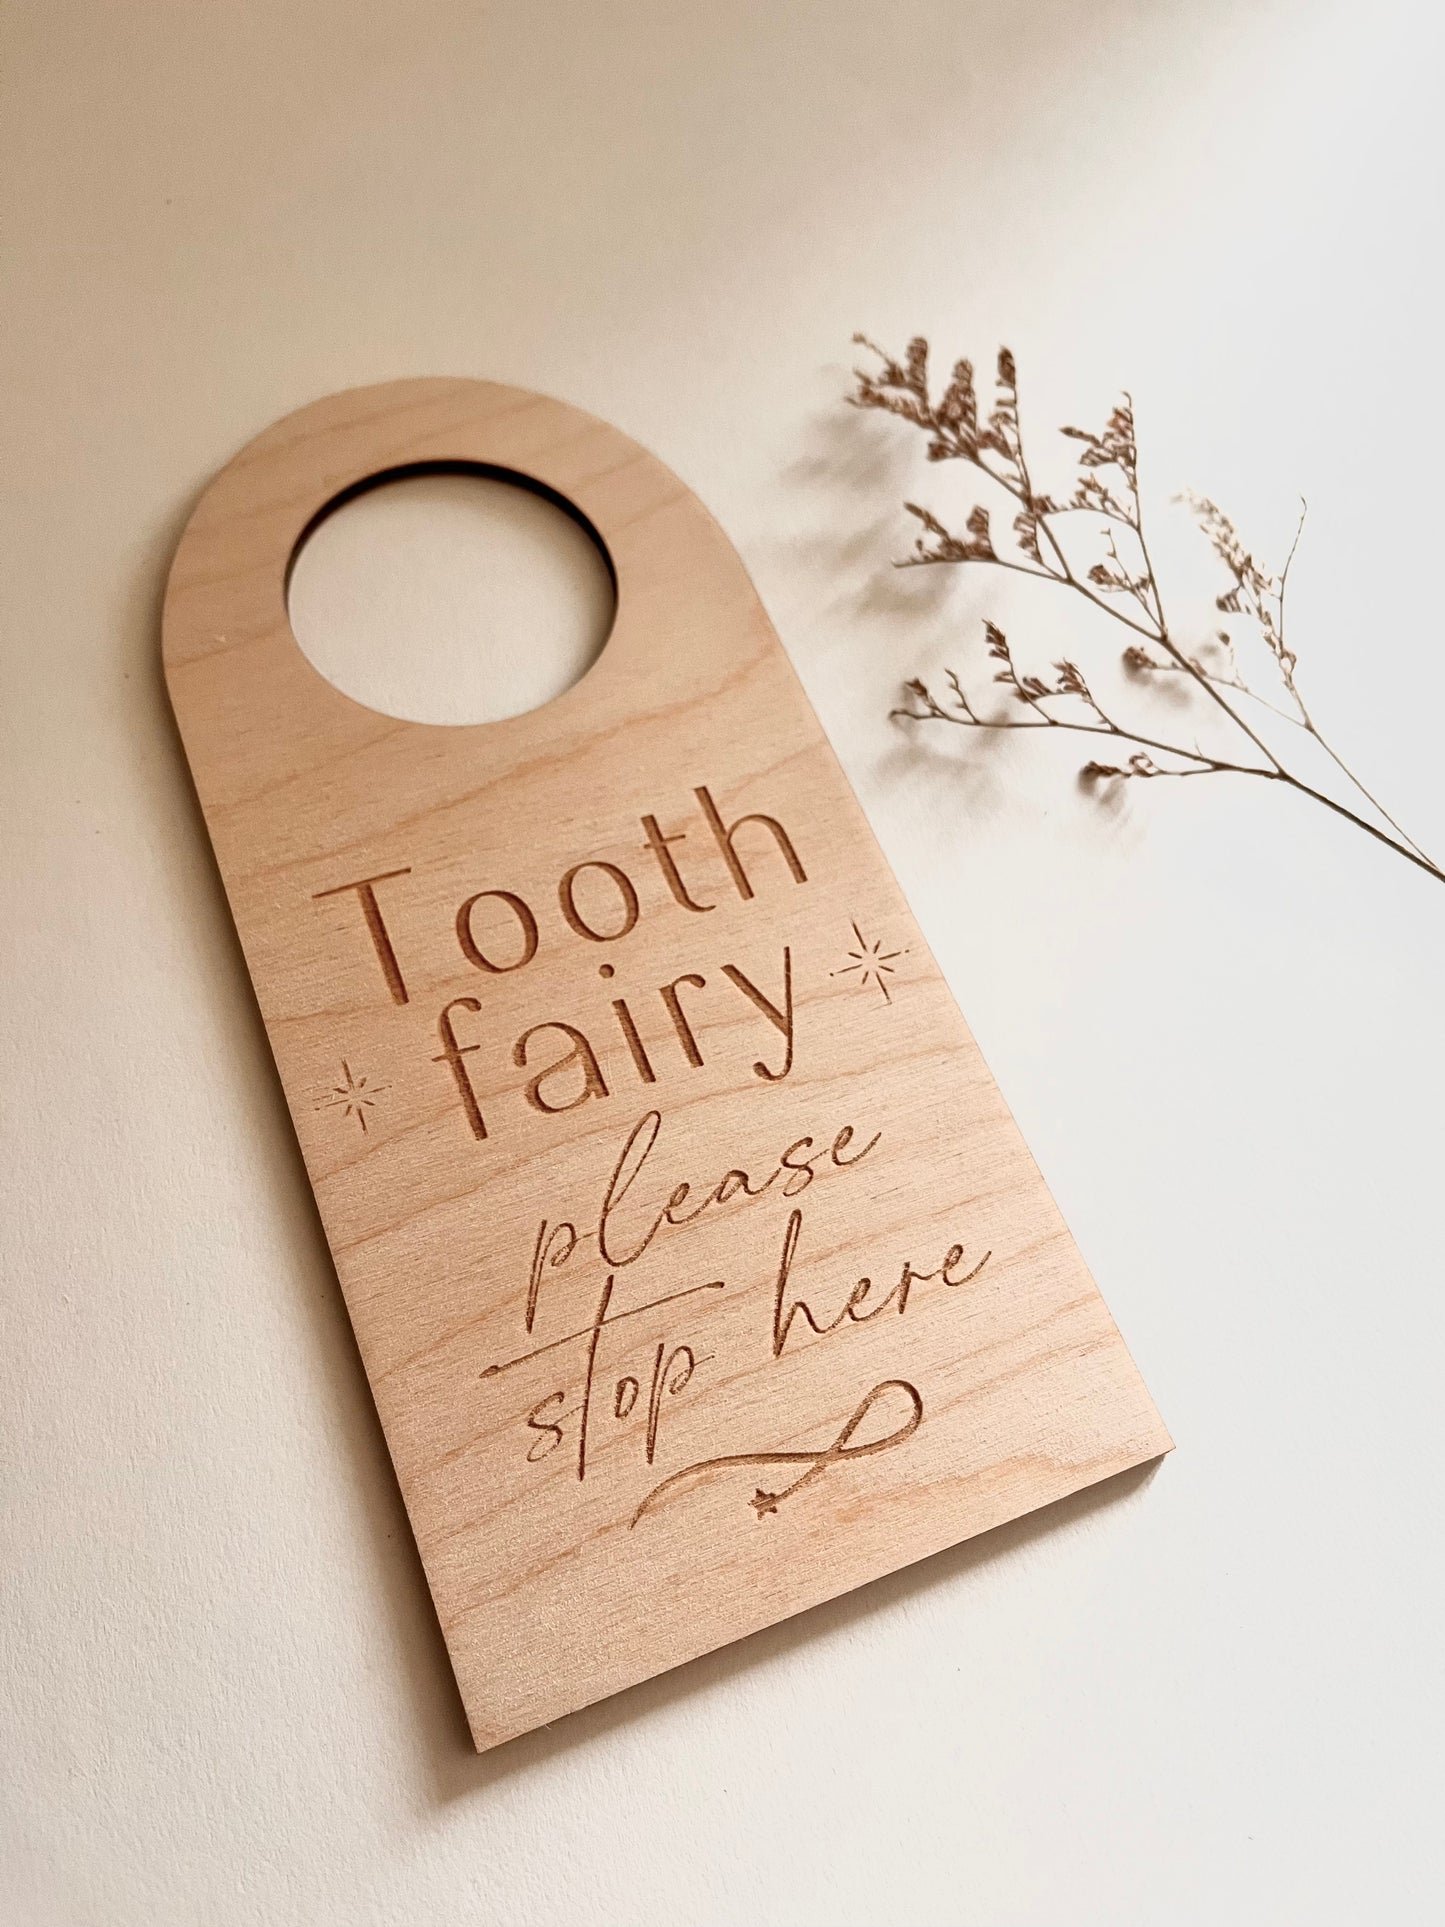 Tooth fairy please stop here sign